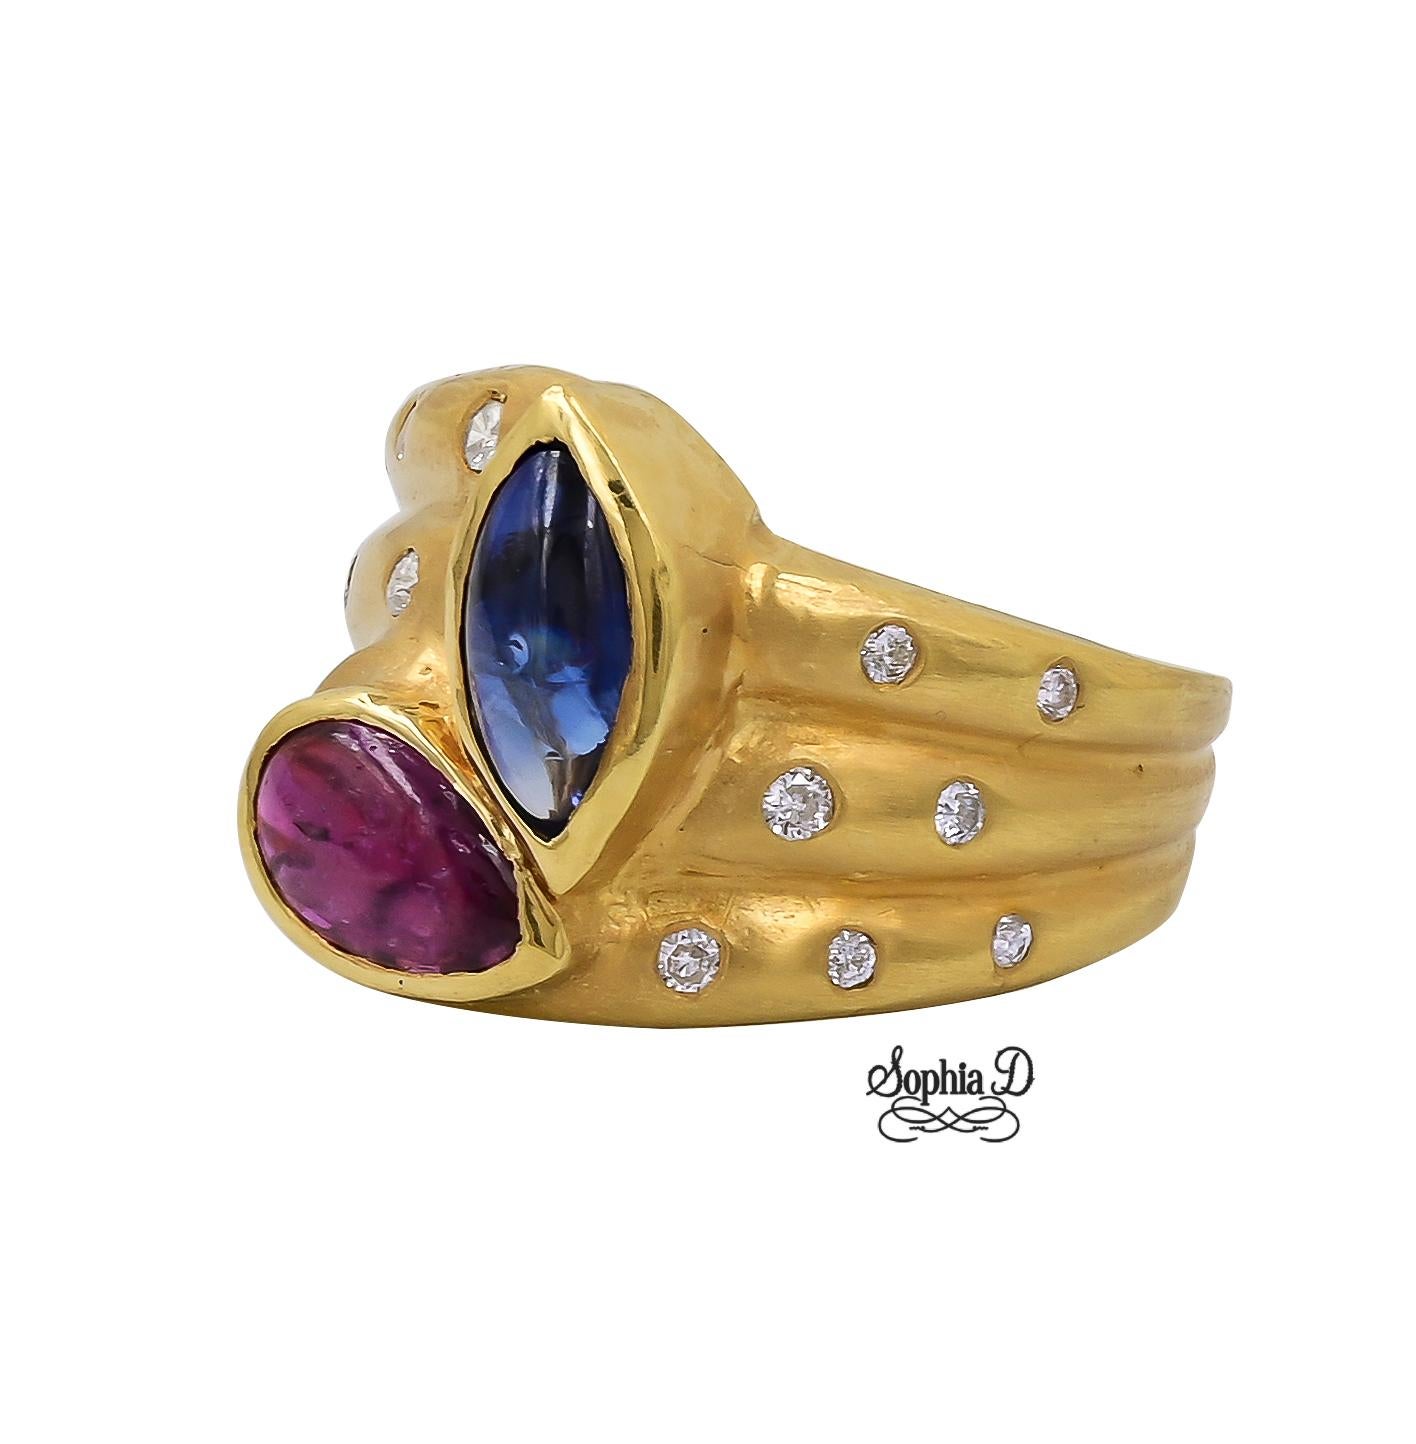 18K yellow gold ring with blue sapphire, ruby and diamonds.

Sophia D by Joseph Dardashti LTD has been known worldwide for 35 years and are inspired by classic Art Deco design that merges with modern manufacturing techniques. 